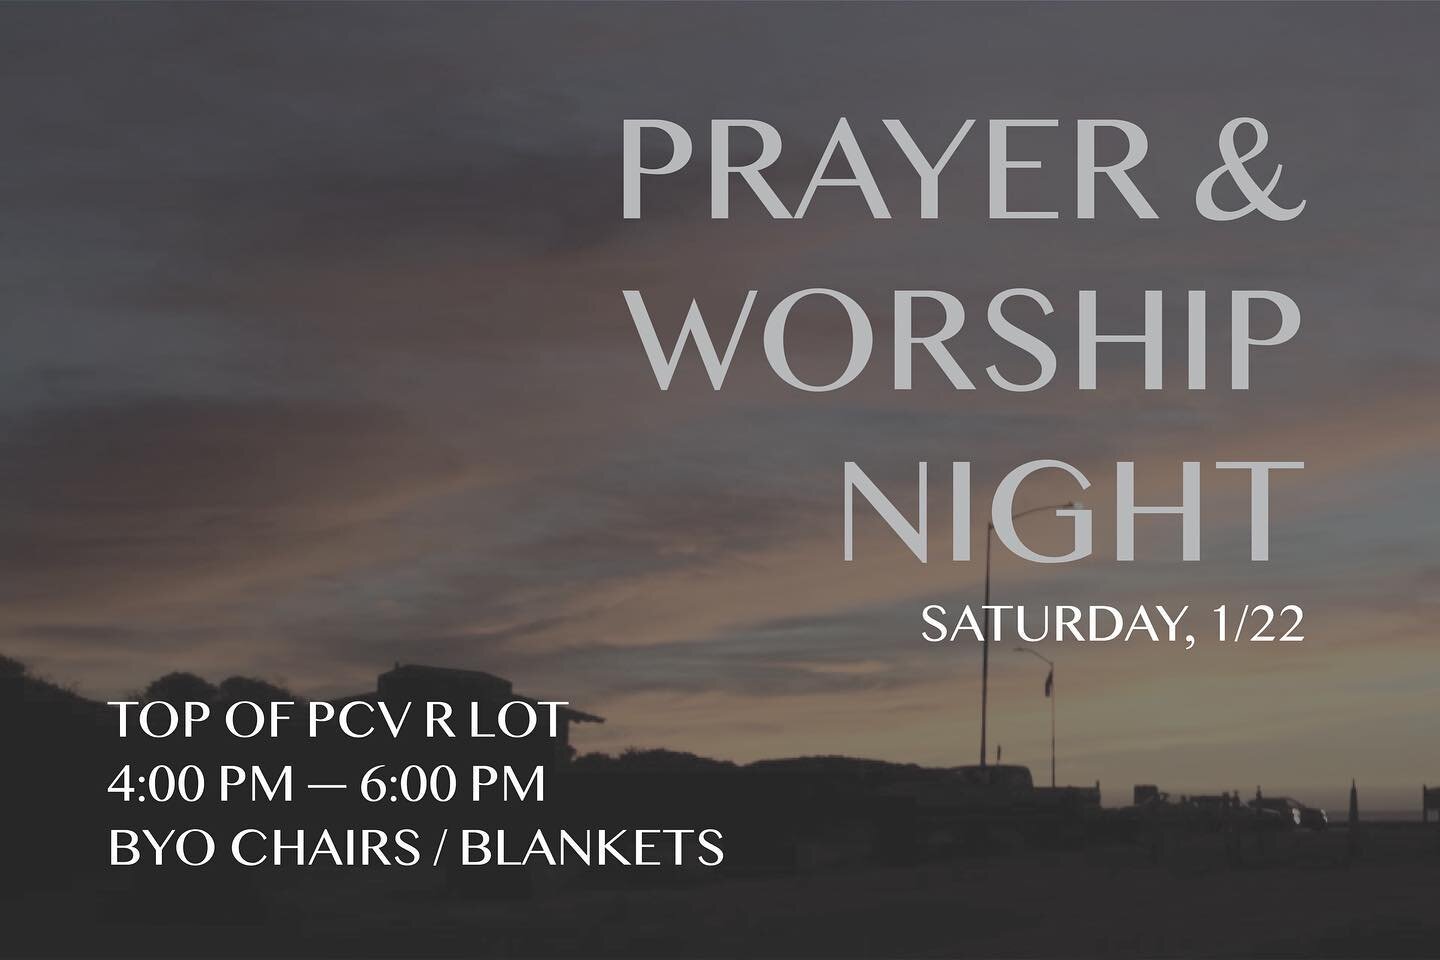 Join us tomorrow for prayer and worship night!

#epicslo #epicmovement